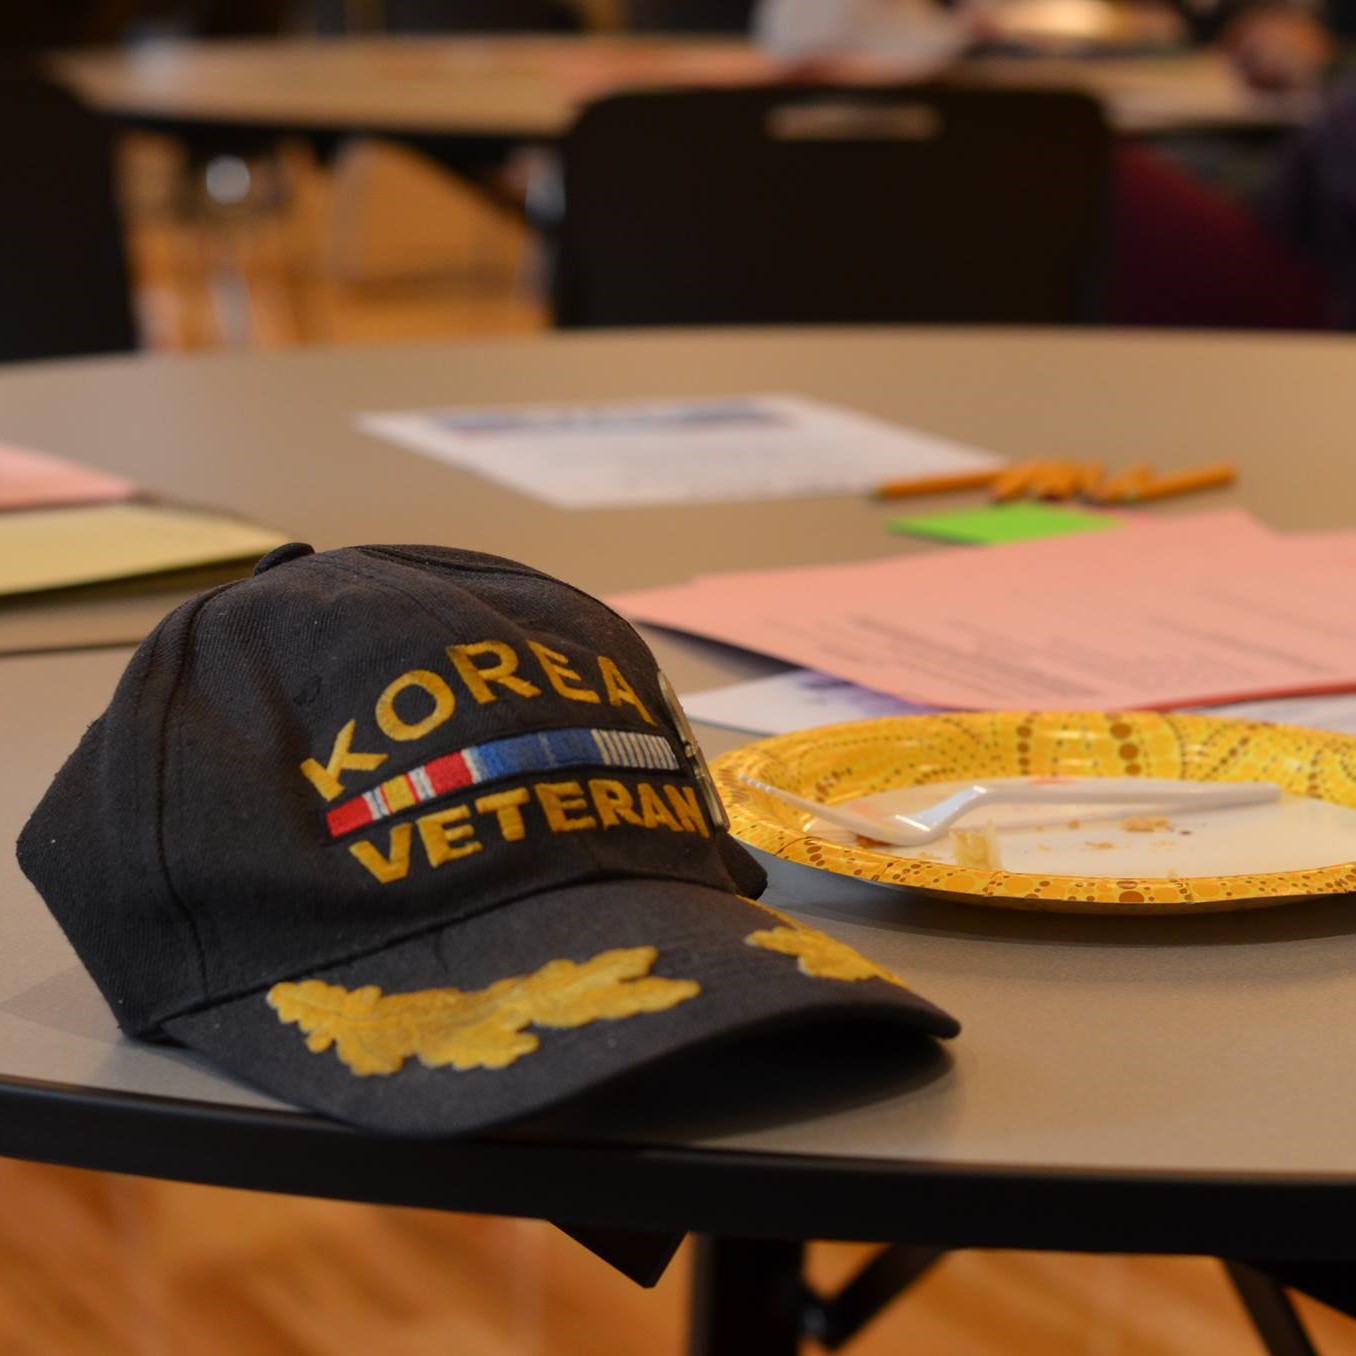 Image of baseball cap with Korean War vet insignias sitting on a table with food and materials